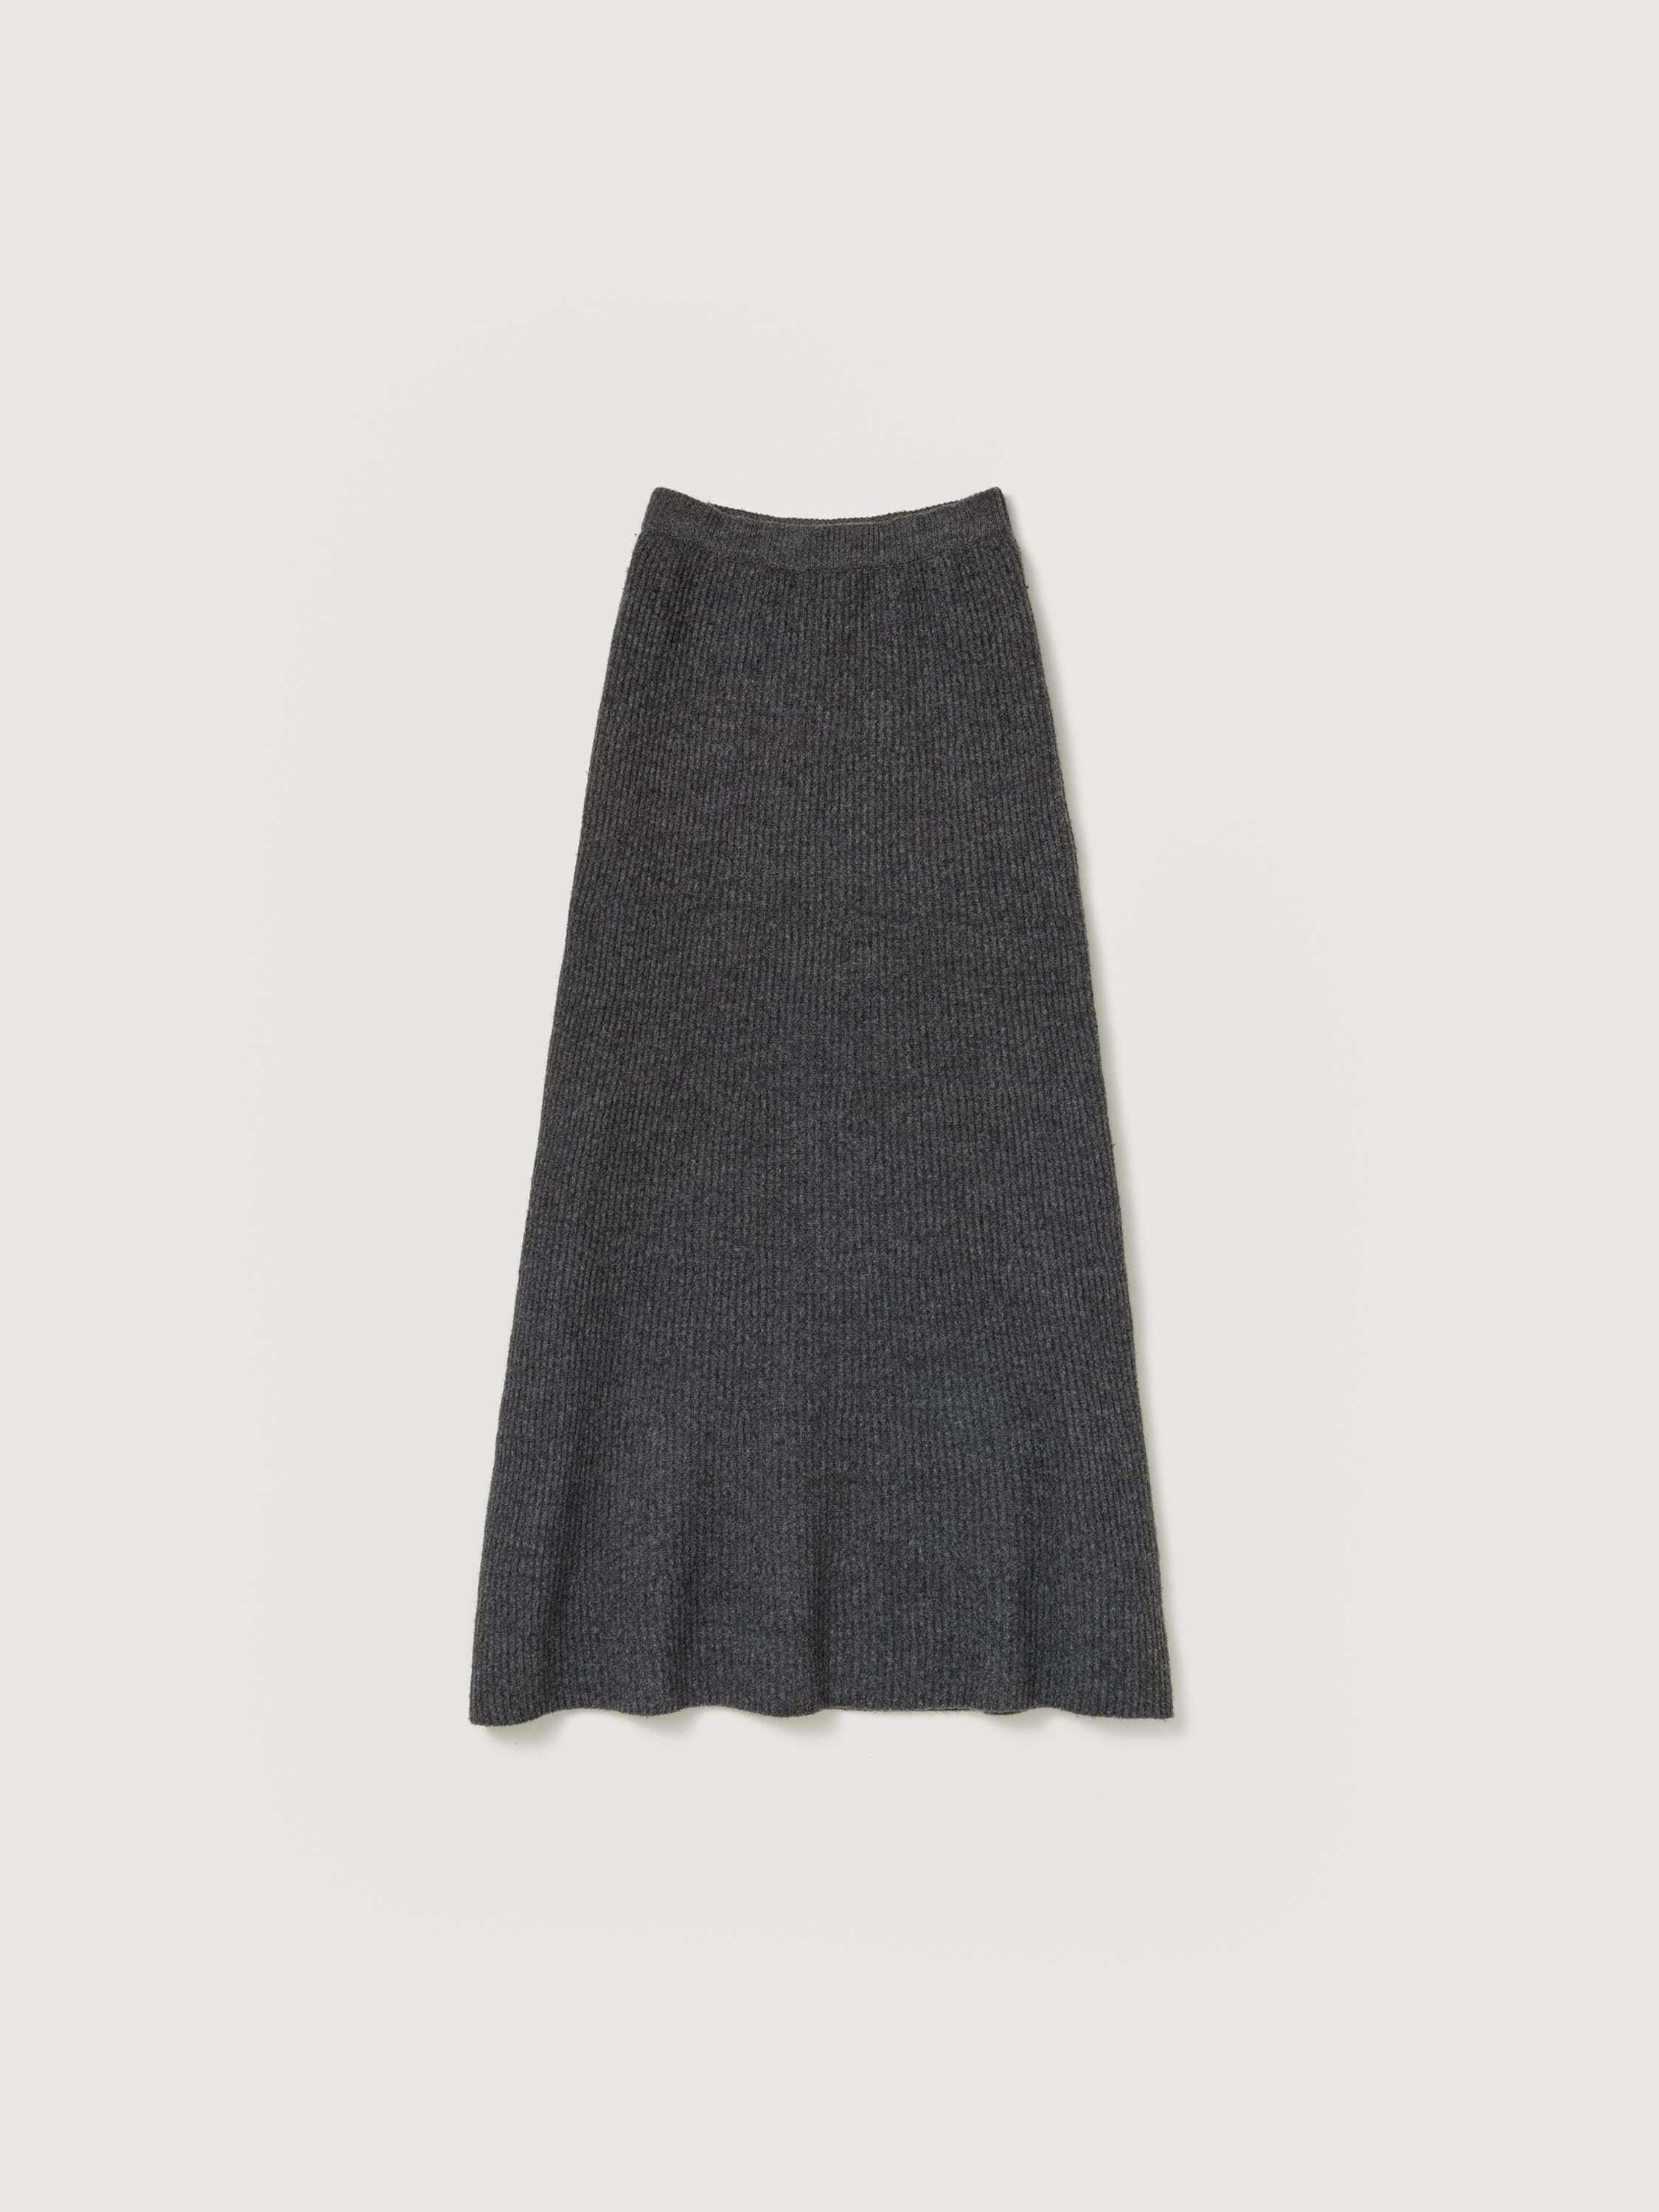 MILLED FRENCH MERINO RIB KNIT FLARE SKIRT 詳細画像 CHARCOAL GRAY 5